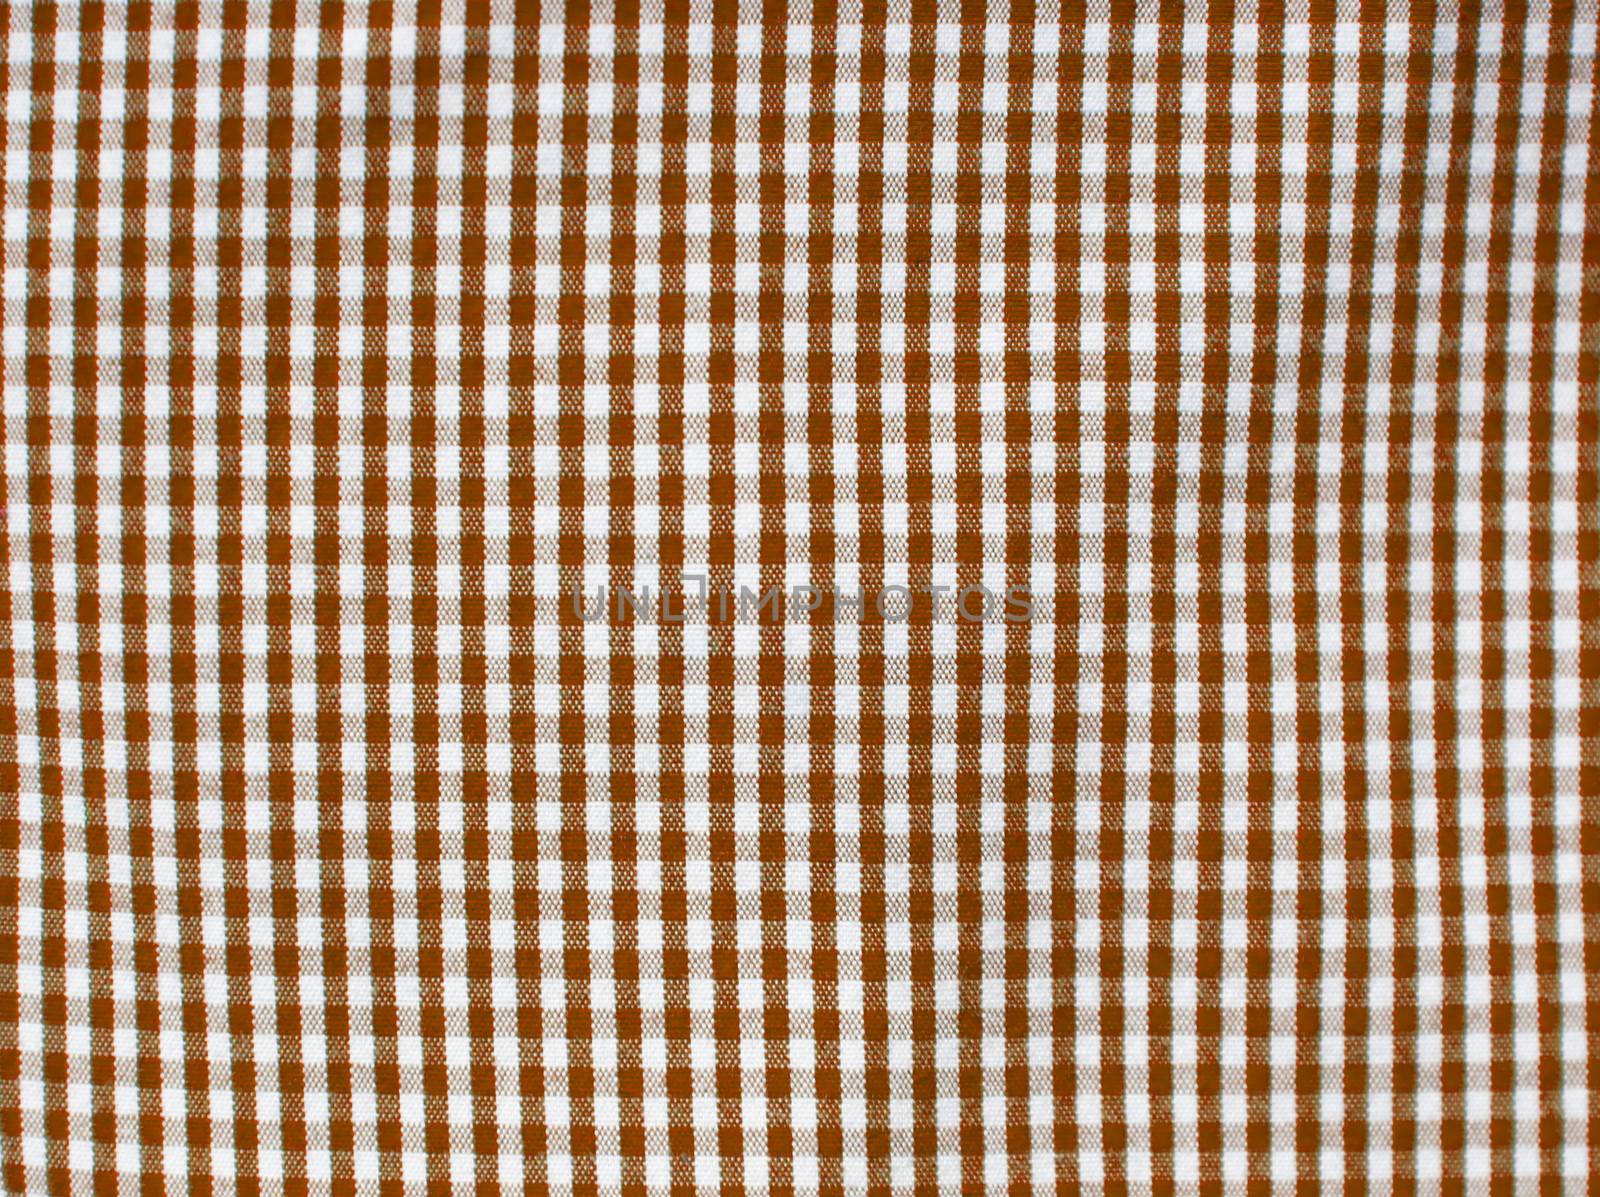 Brown square fabric pattern for background